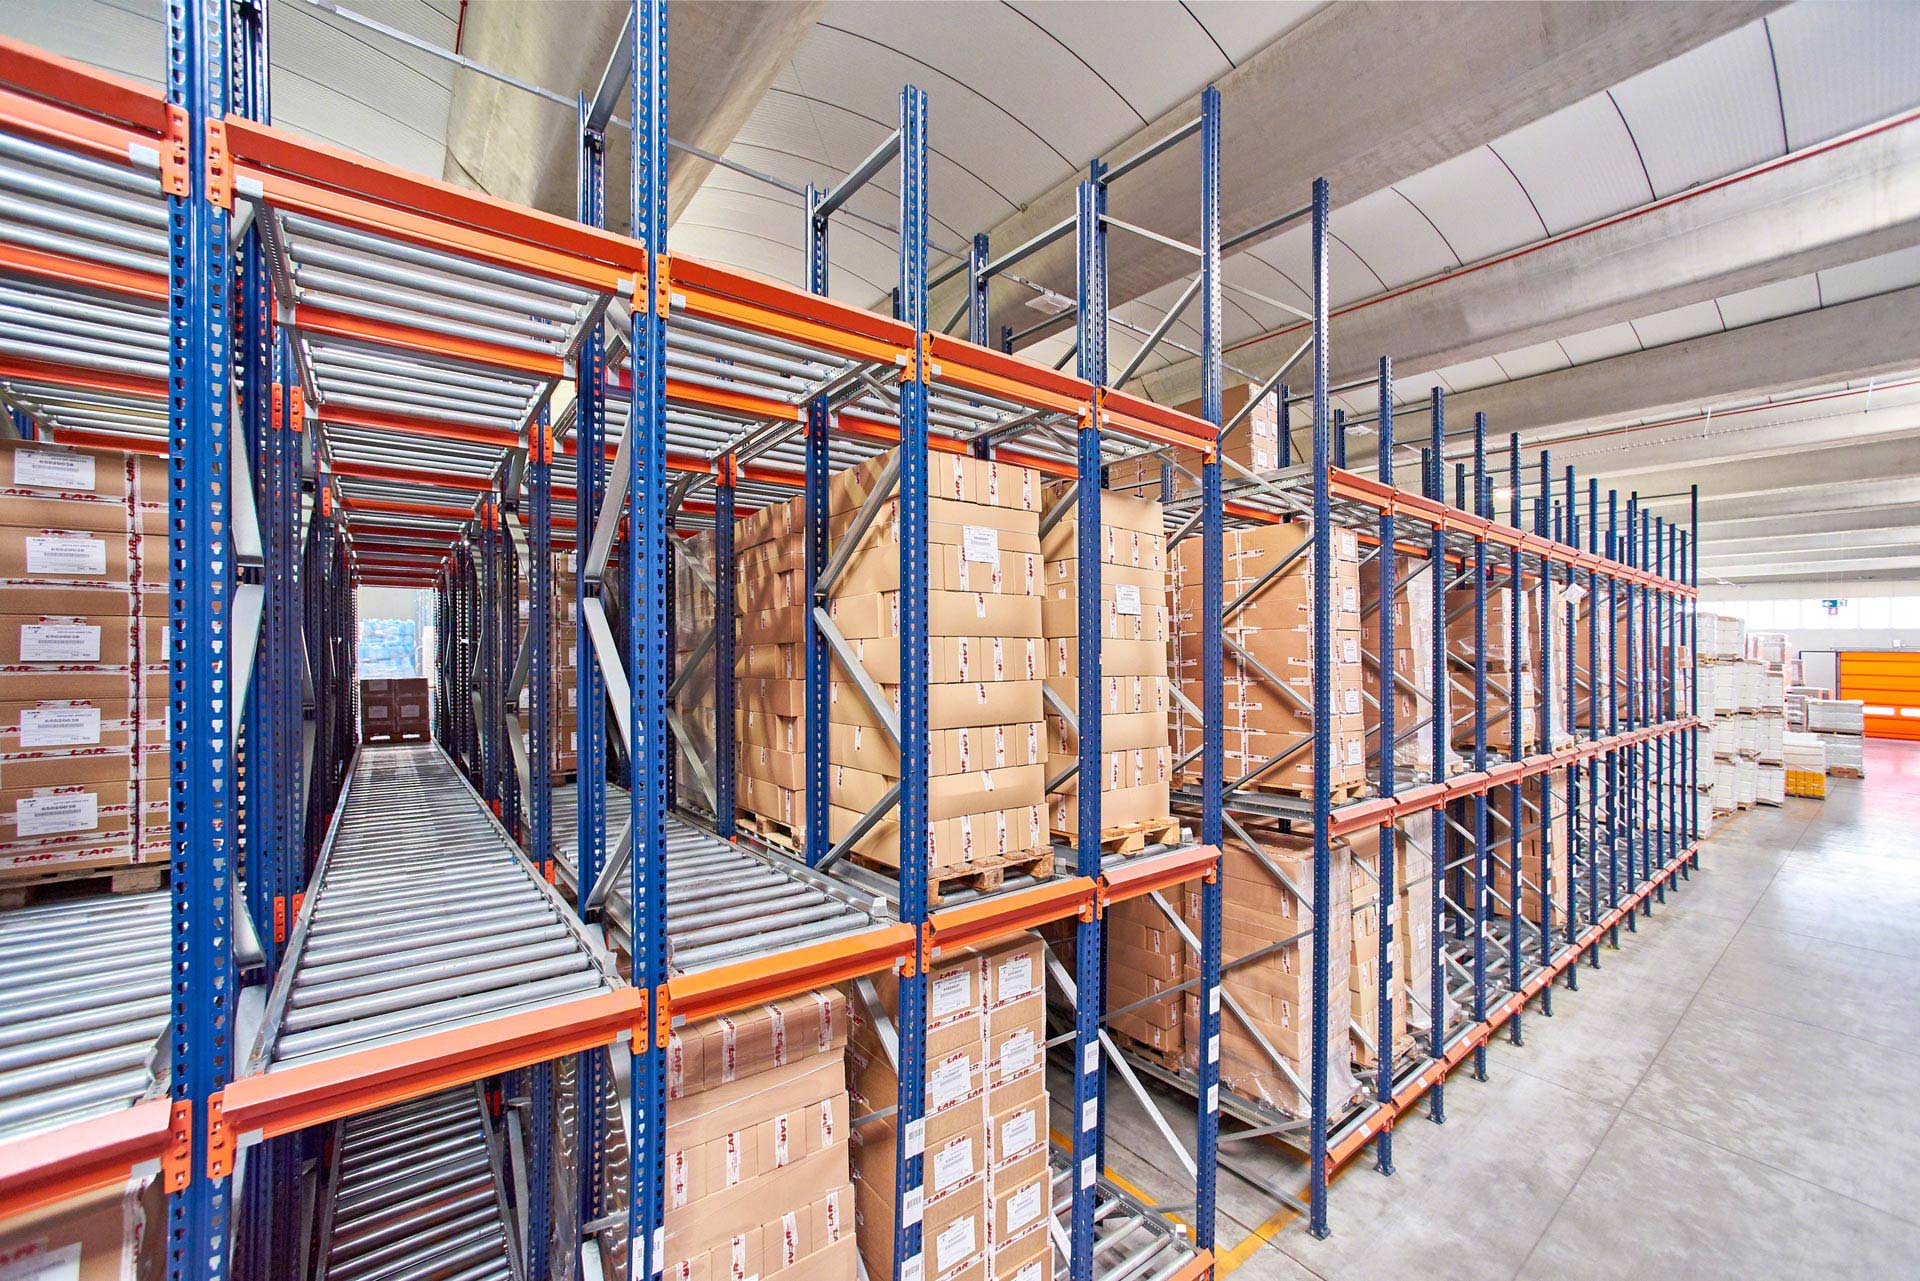 The depth of pallet flow rack channels depends on the number of pallets to be stored